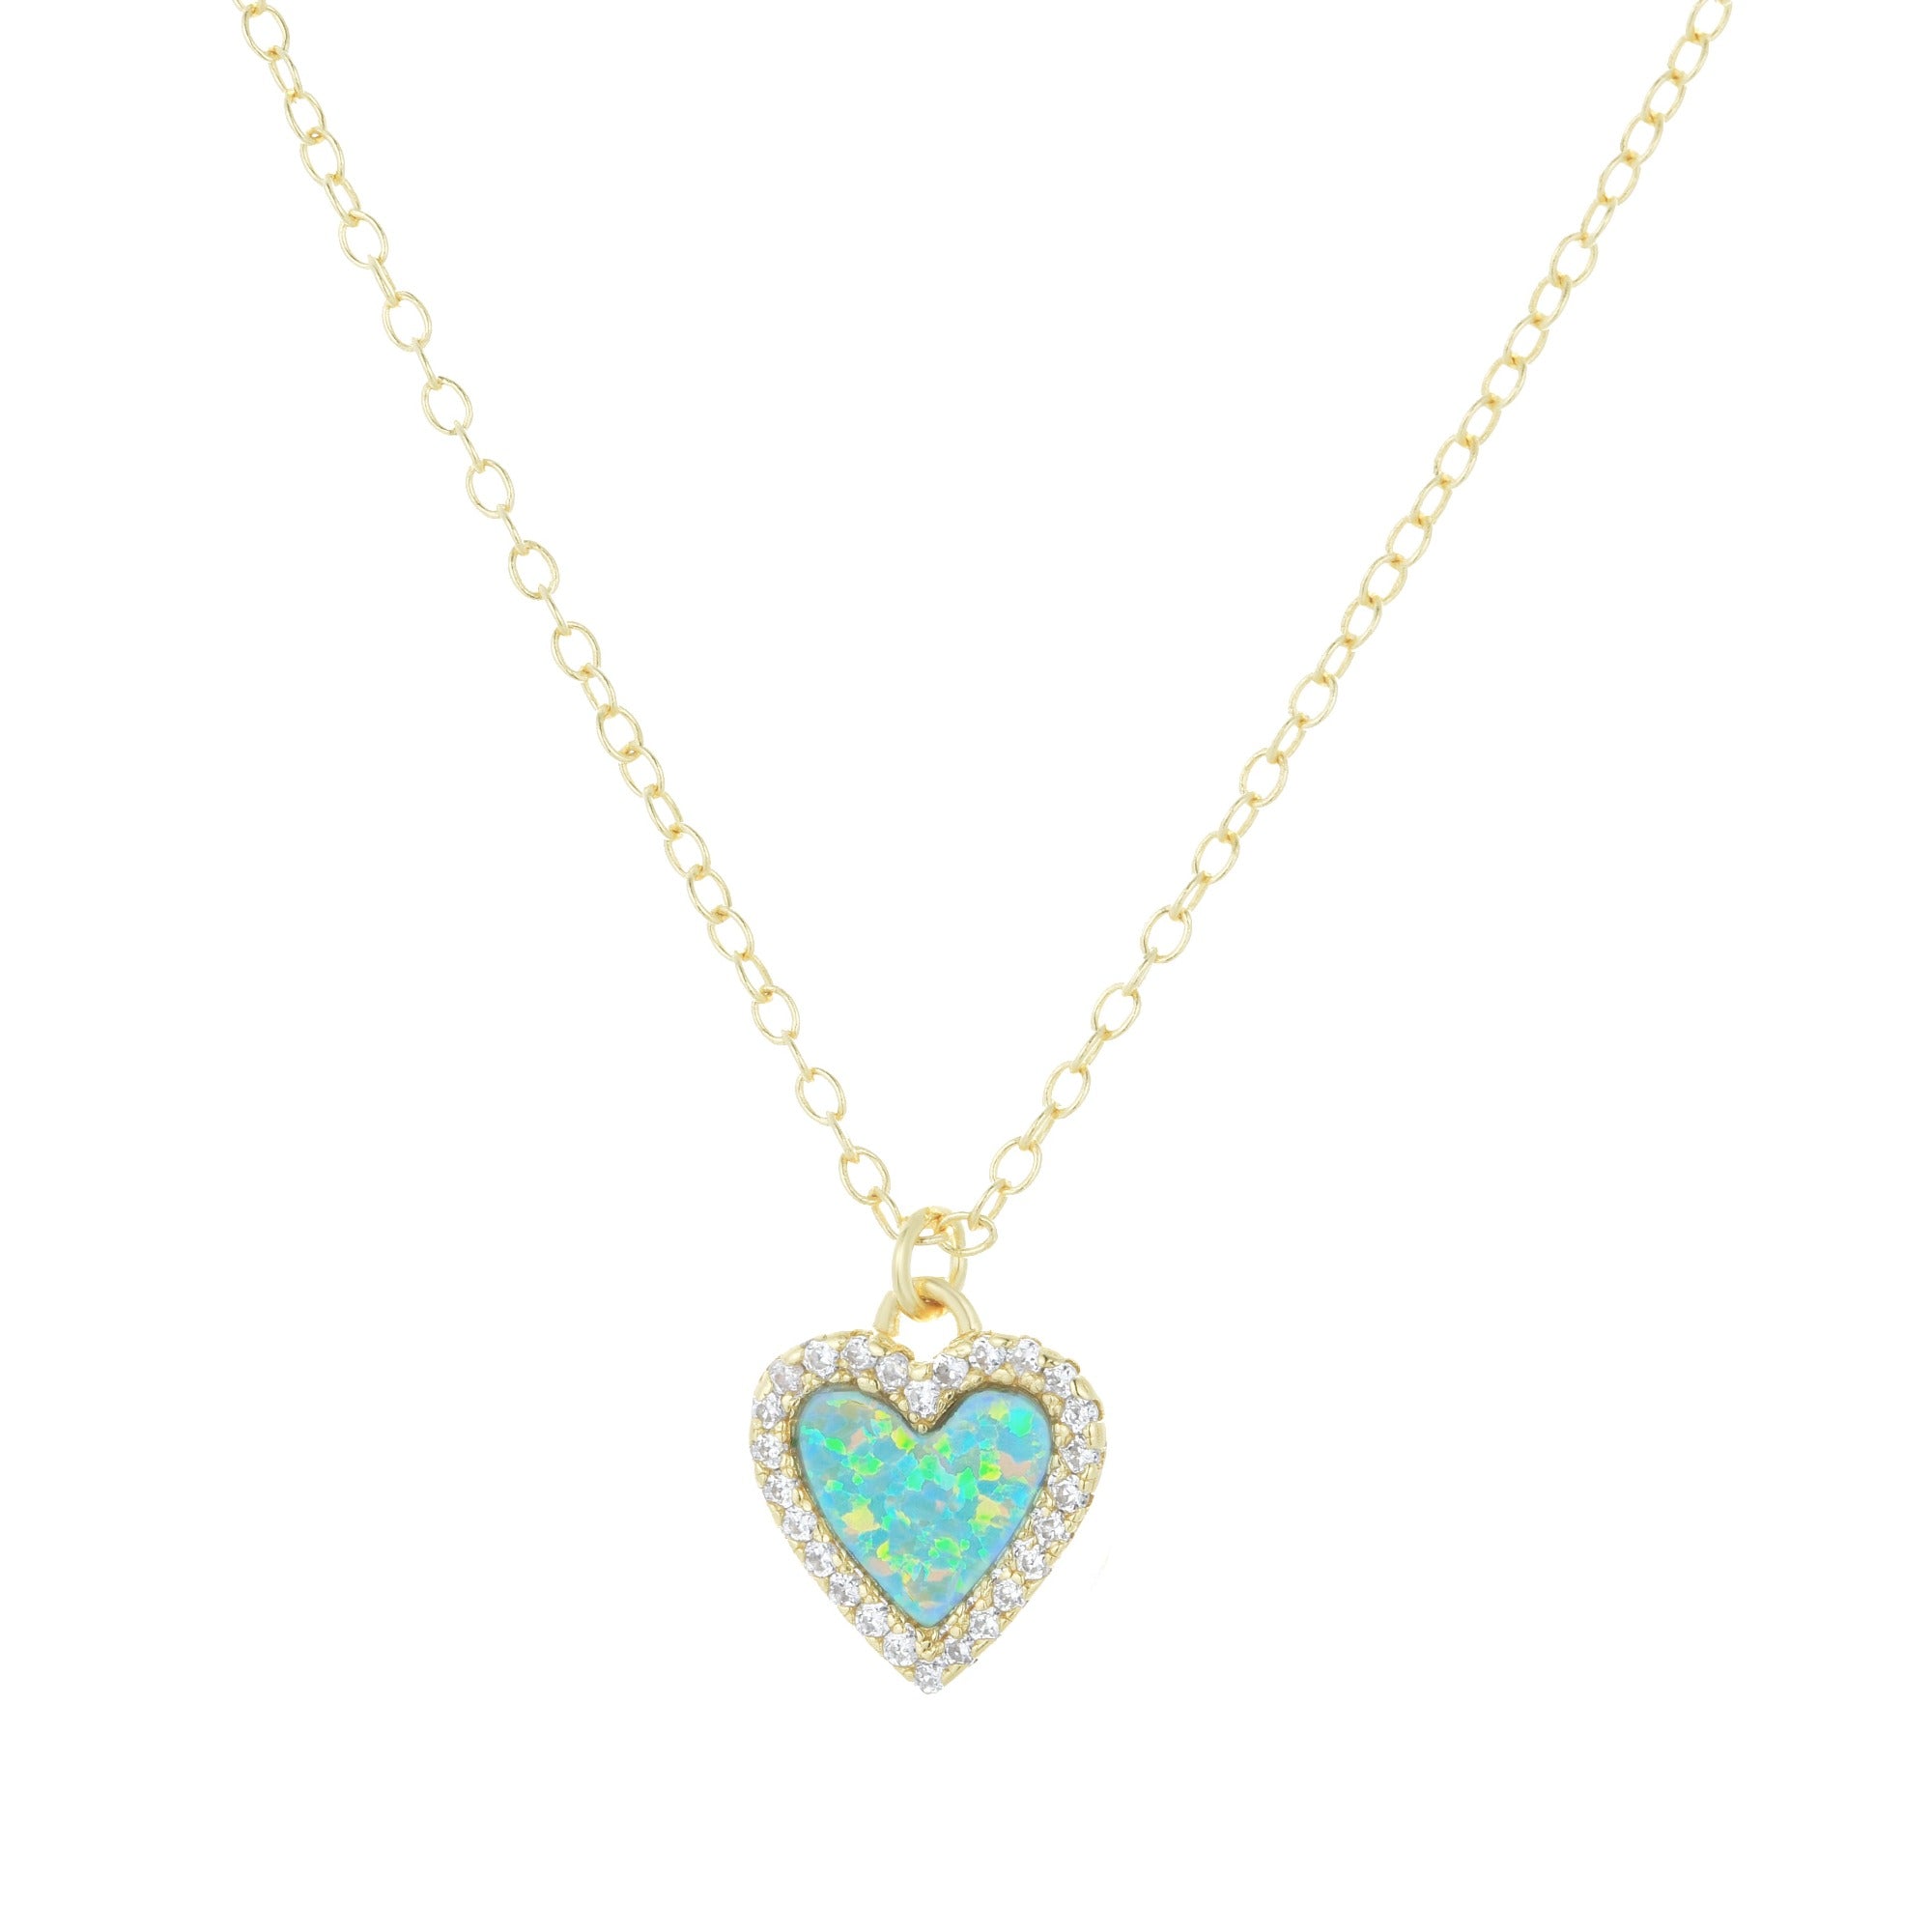 mini opal heart necklace with crystals green opal gold